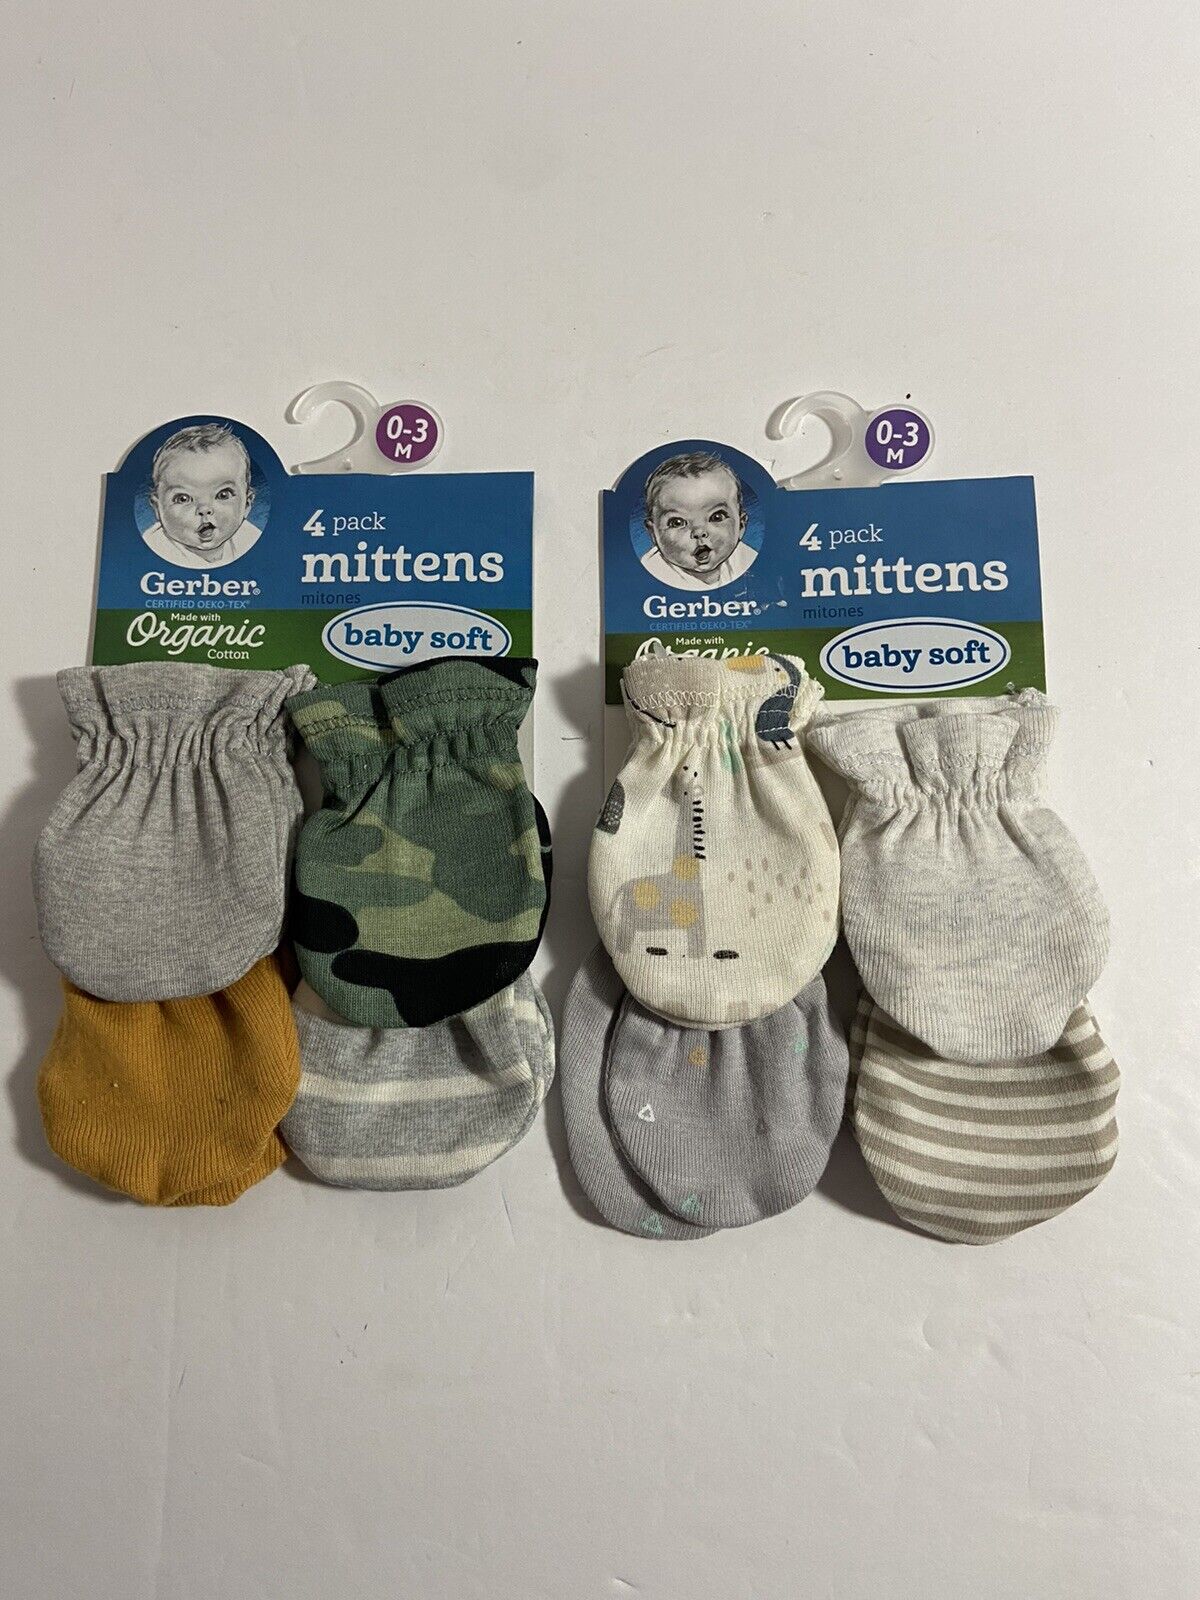 Nwt Gerber Baby Boy 8-pack Organic Cotton Animal Stripes Mittens Size 0-3m